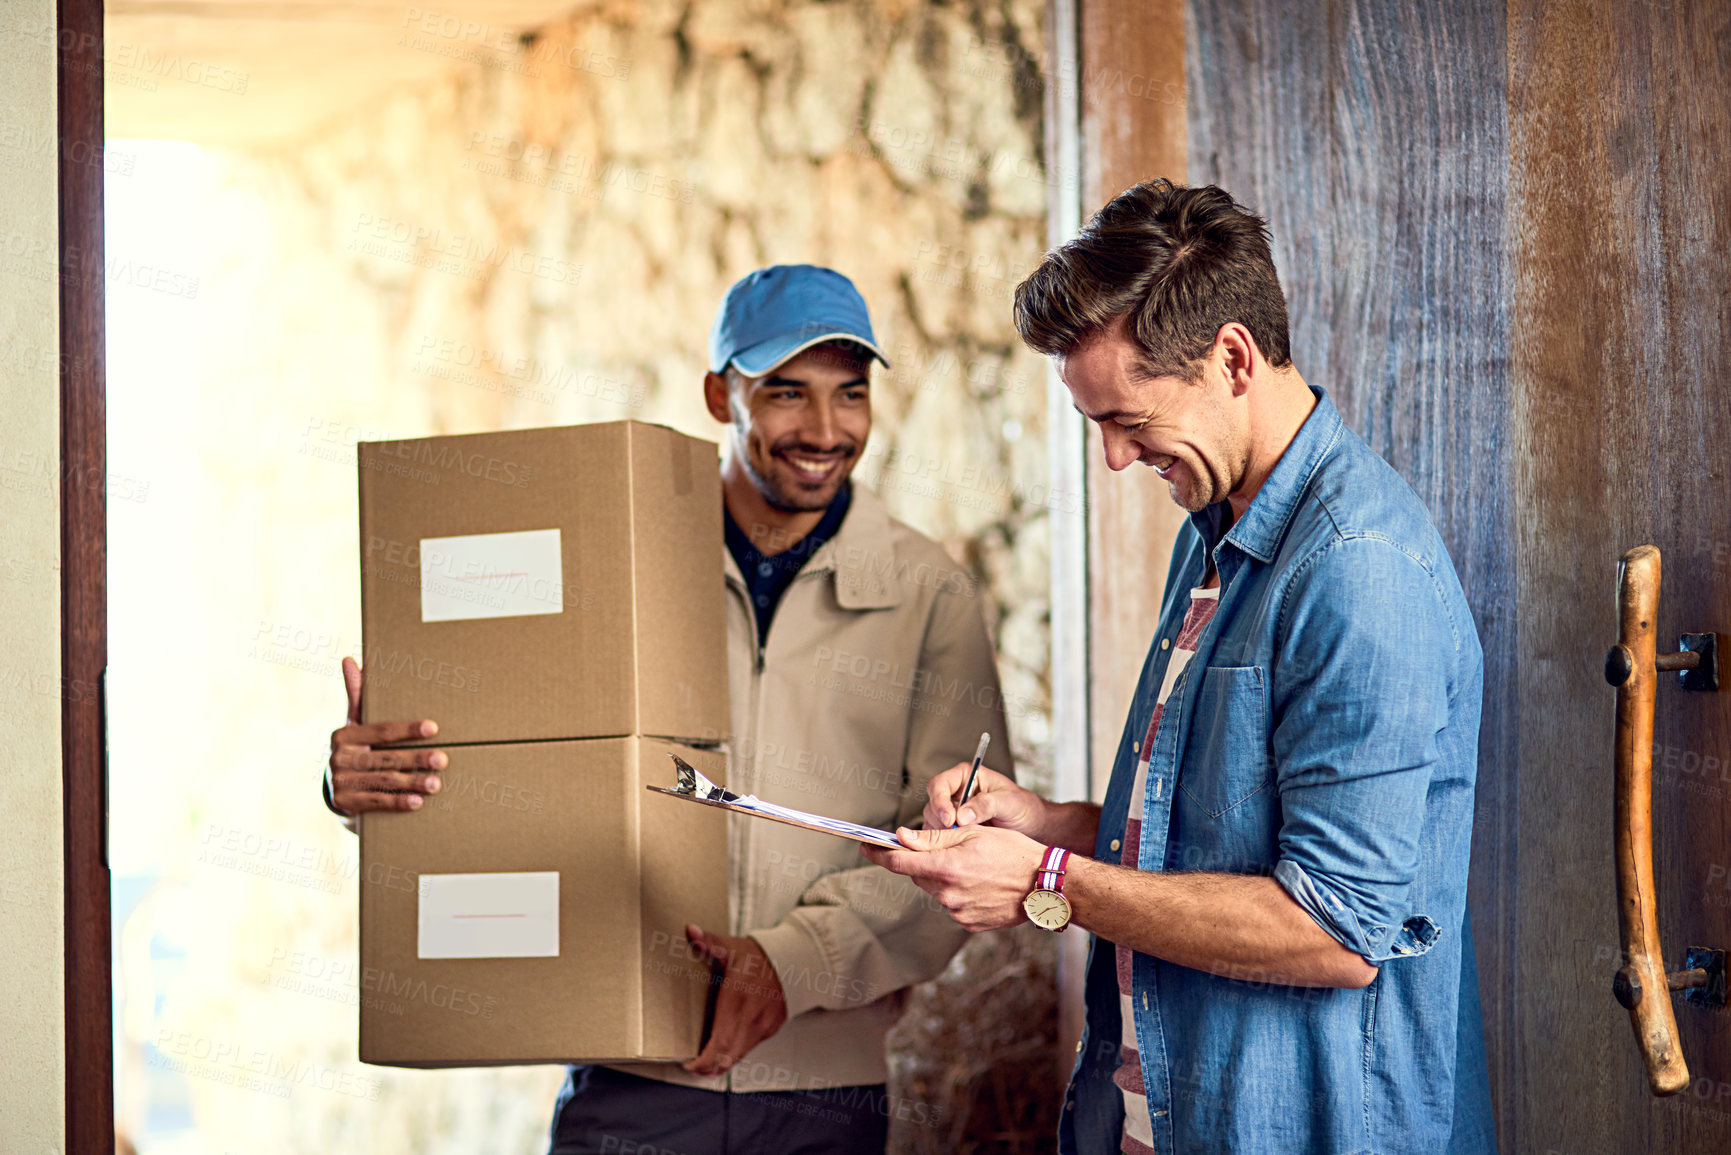 Buy stock photo Cropped shot of a courier making a delivery to a customer at his home